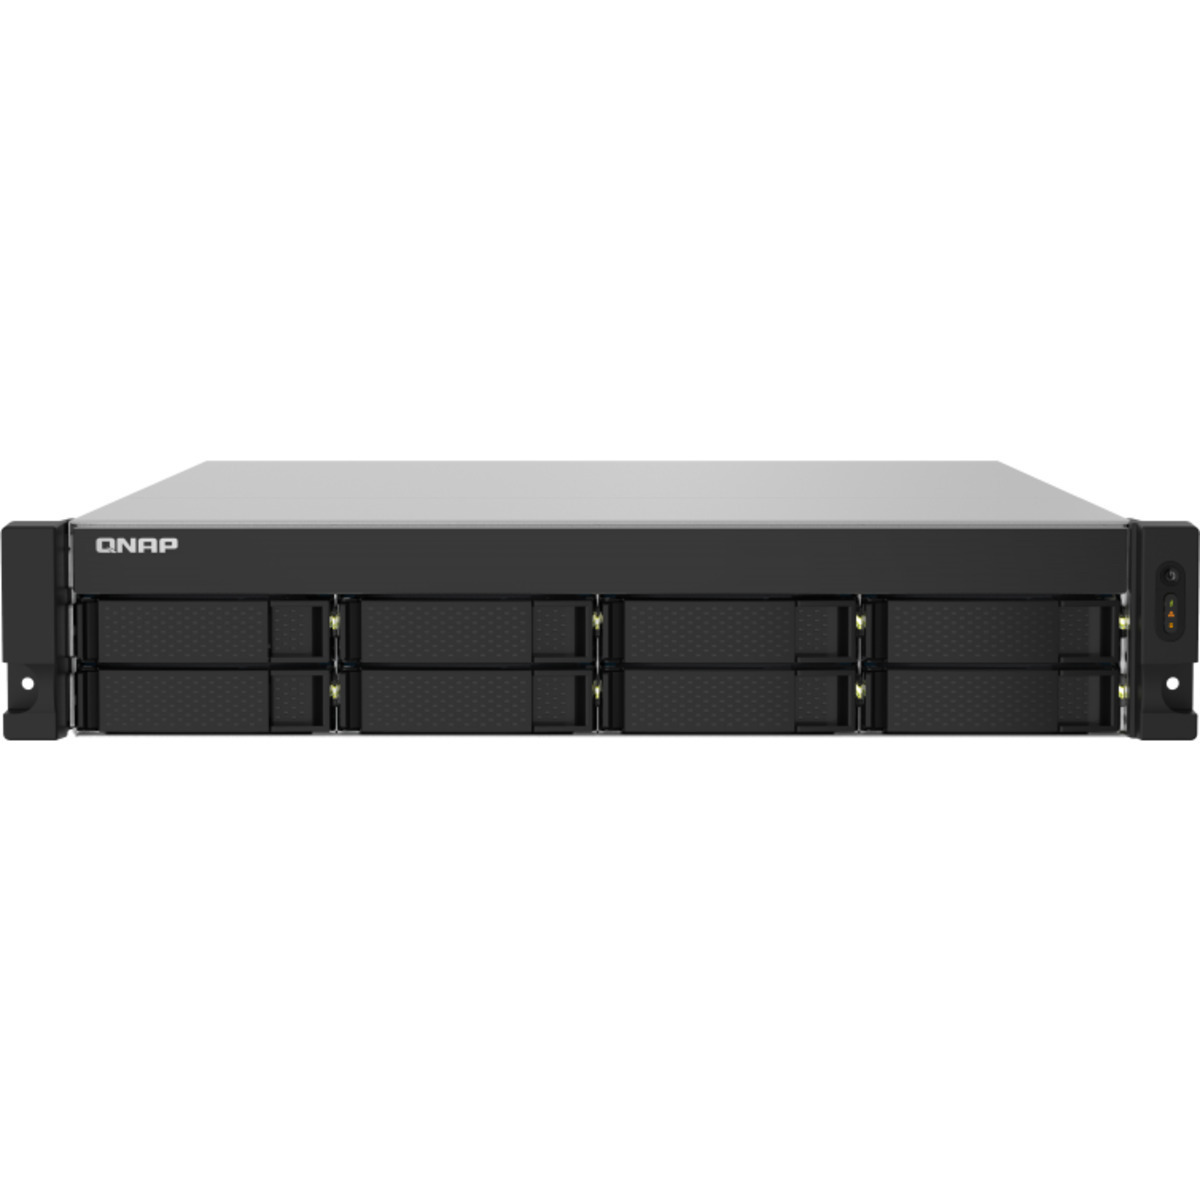 QNAP TS-832PXU 176tb 8-Bay RackMount Personal / Basic Home / Small Office NAS - Network Attached Storage Device 8x22tb Western Digital Ultrastar HC580 SED WUH722422ALE6L1 3.5 7200rpm SATA 6Gb/s HDD ENTERPRISE Class Drives Installed - Burn-In Tested - FREE RAM UPGRADE TS-832PXU